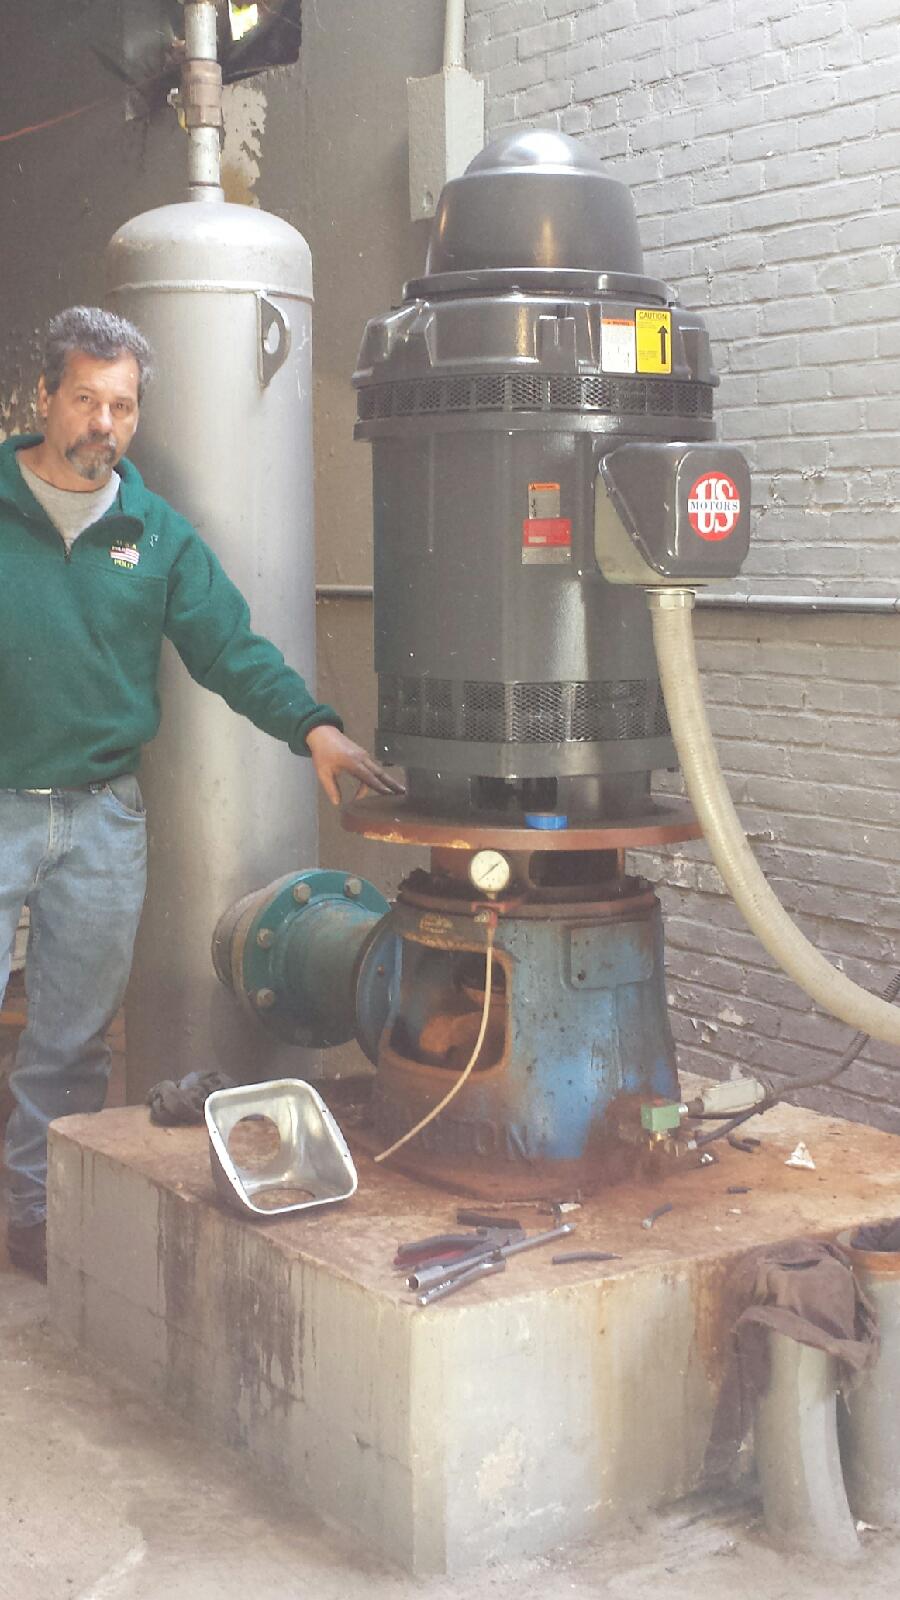 125HP turbine motor installed at Golf Course - Turbine Motor in Copiague, New York